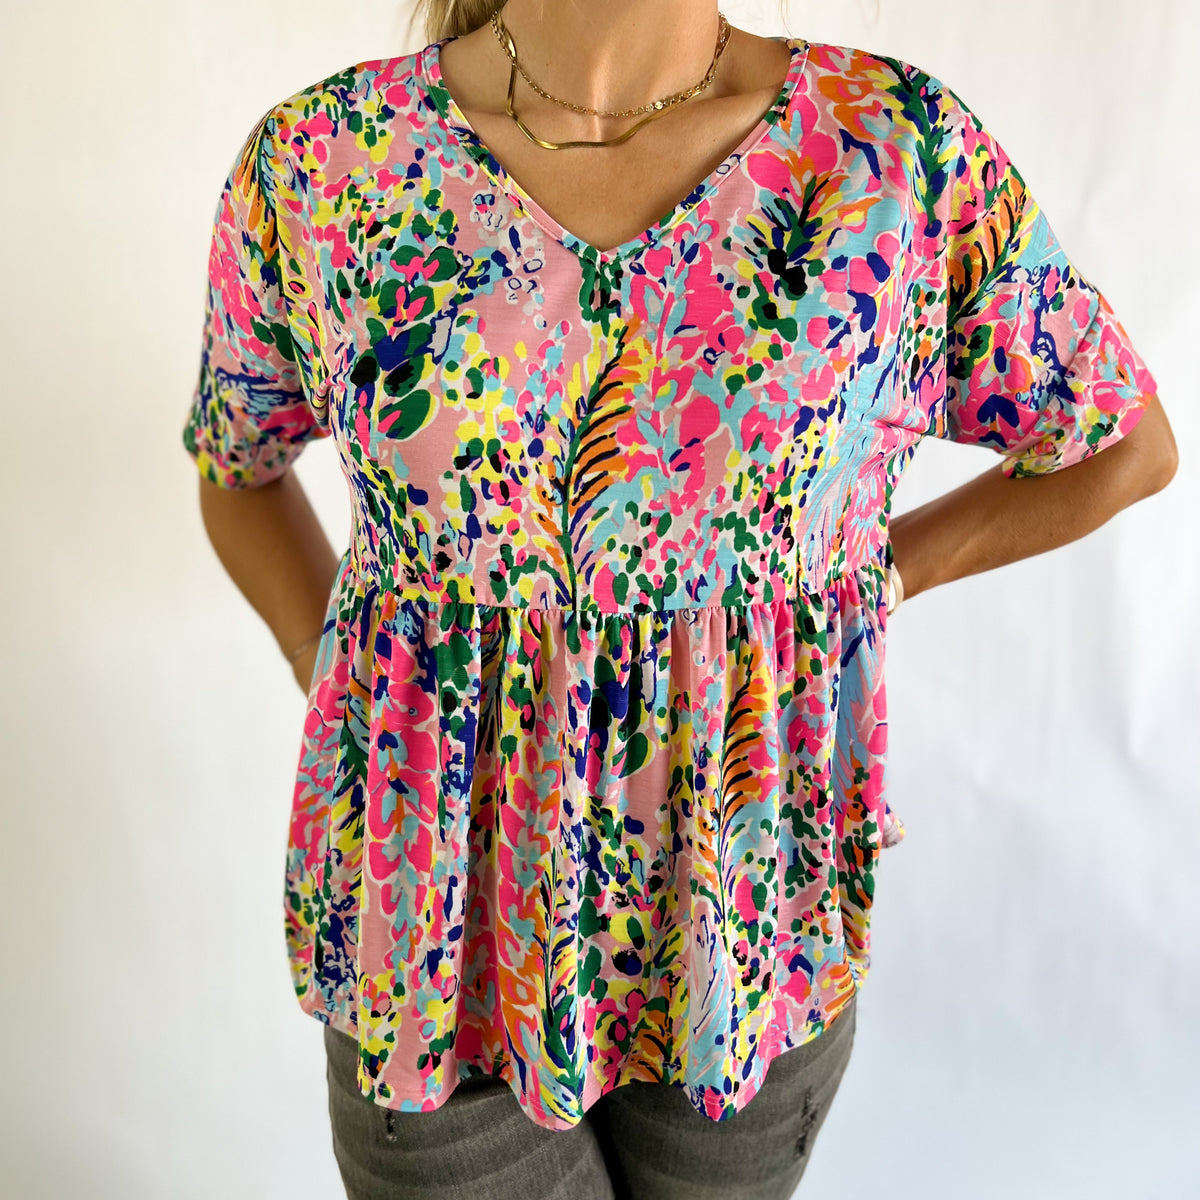 Finley Floral Top - Pink Tone